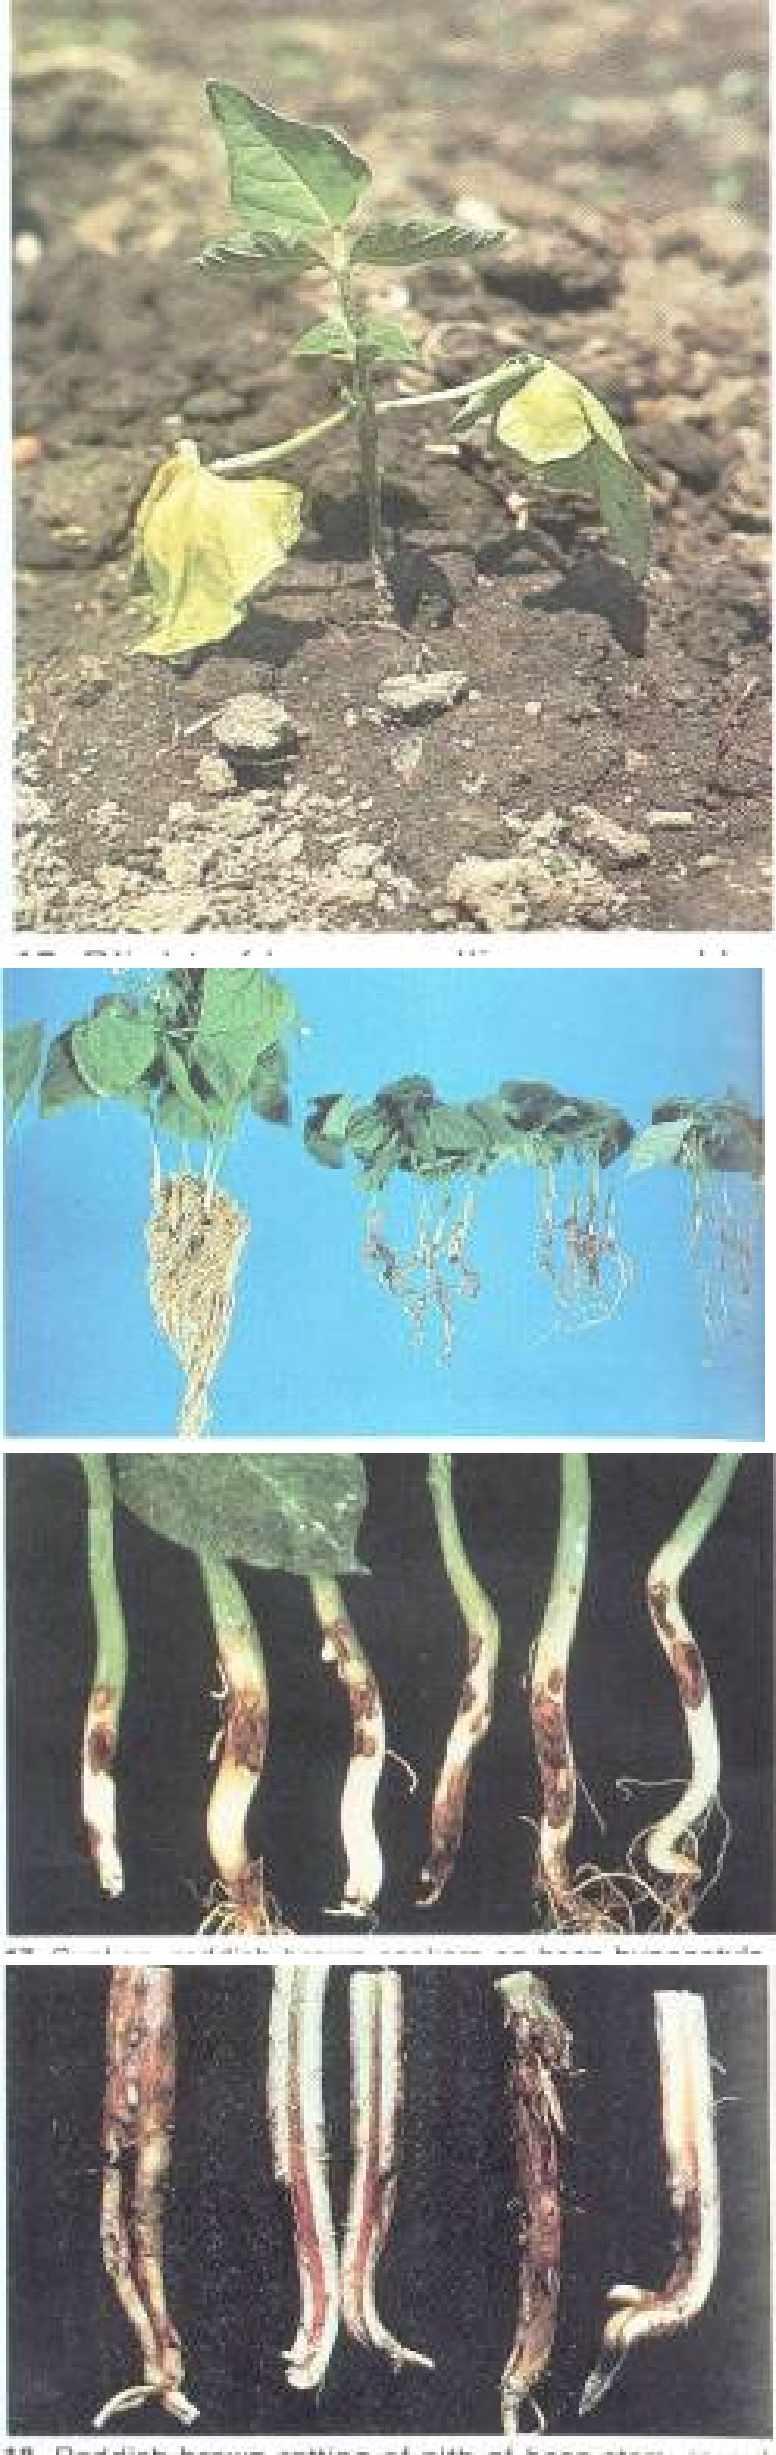 27 Blight of bean seedling, caused by pythium sp. 28 Stunting of bean plants by pythium.